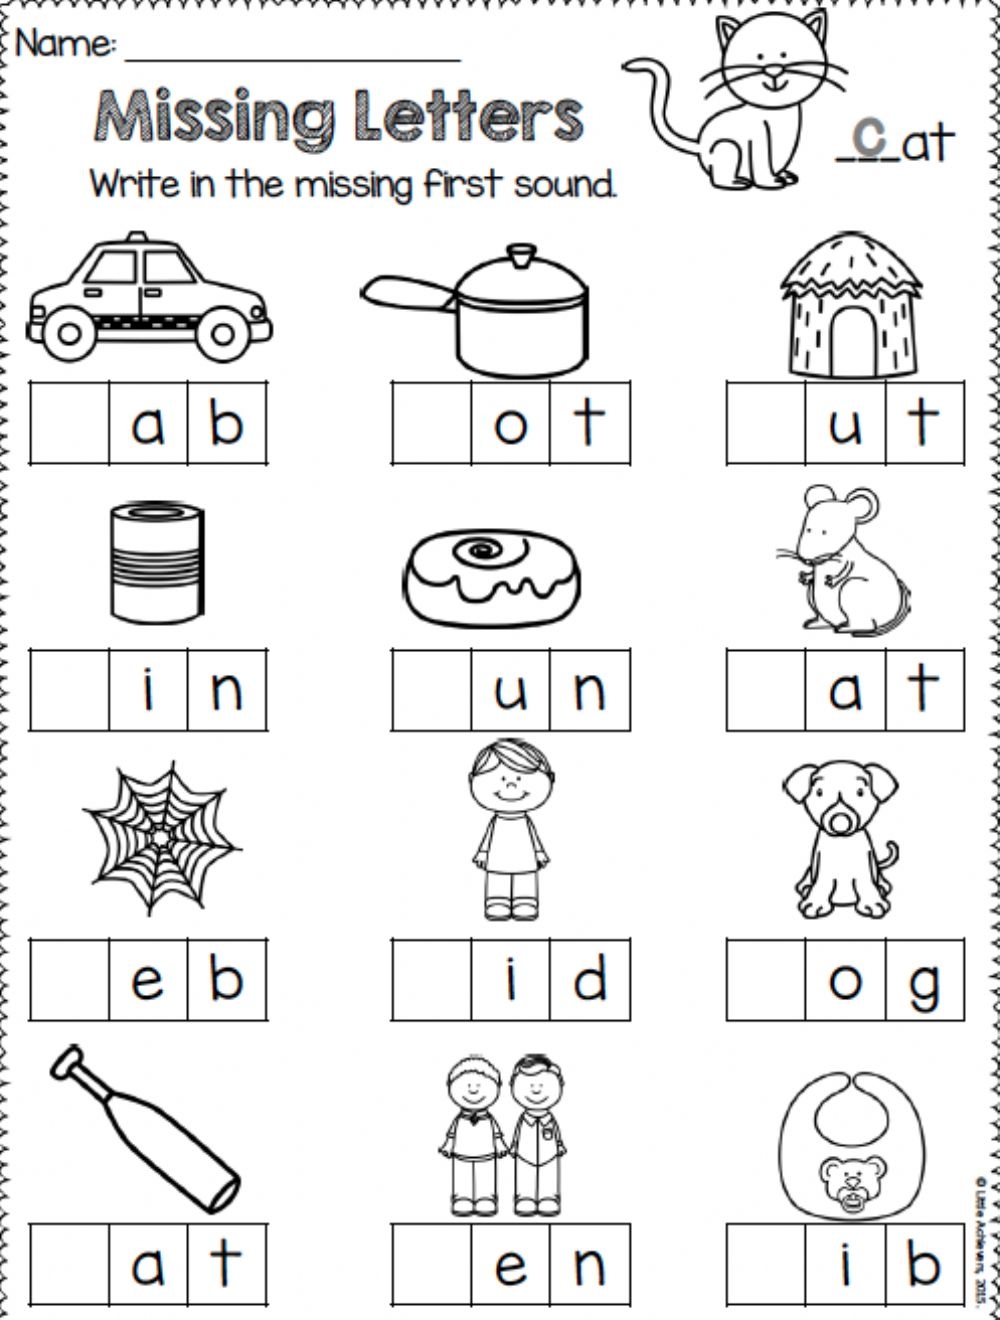 Search For Words With Missing Letters Word Search Printable